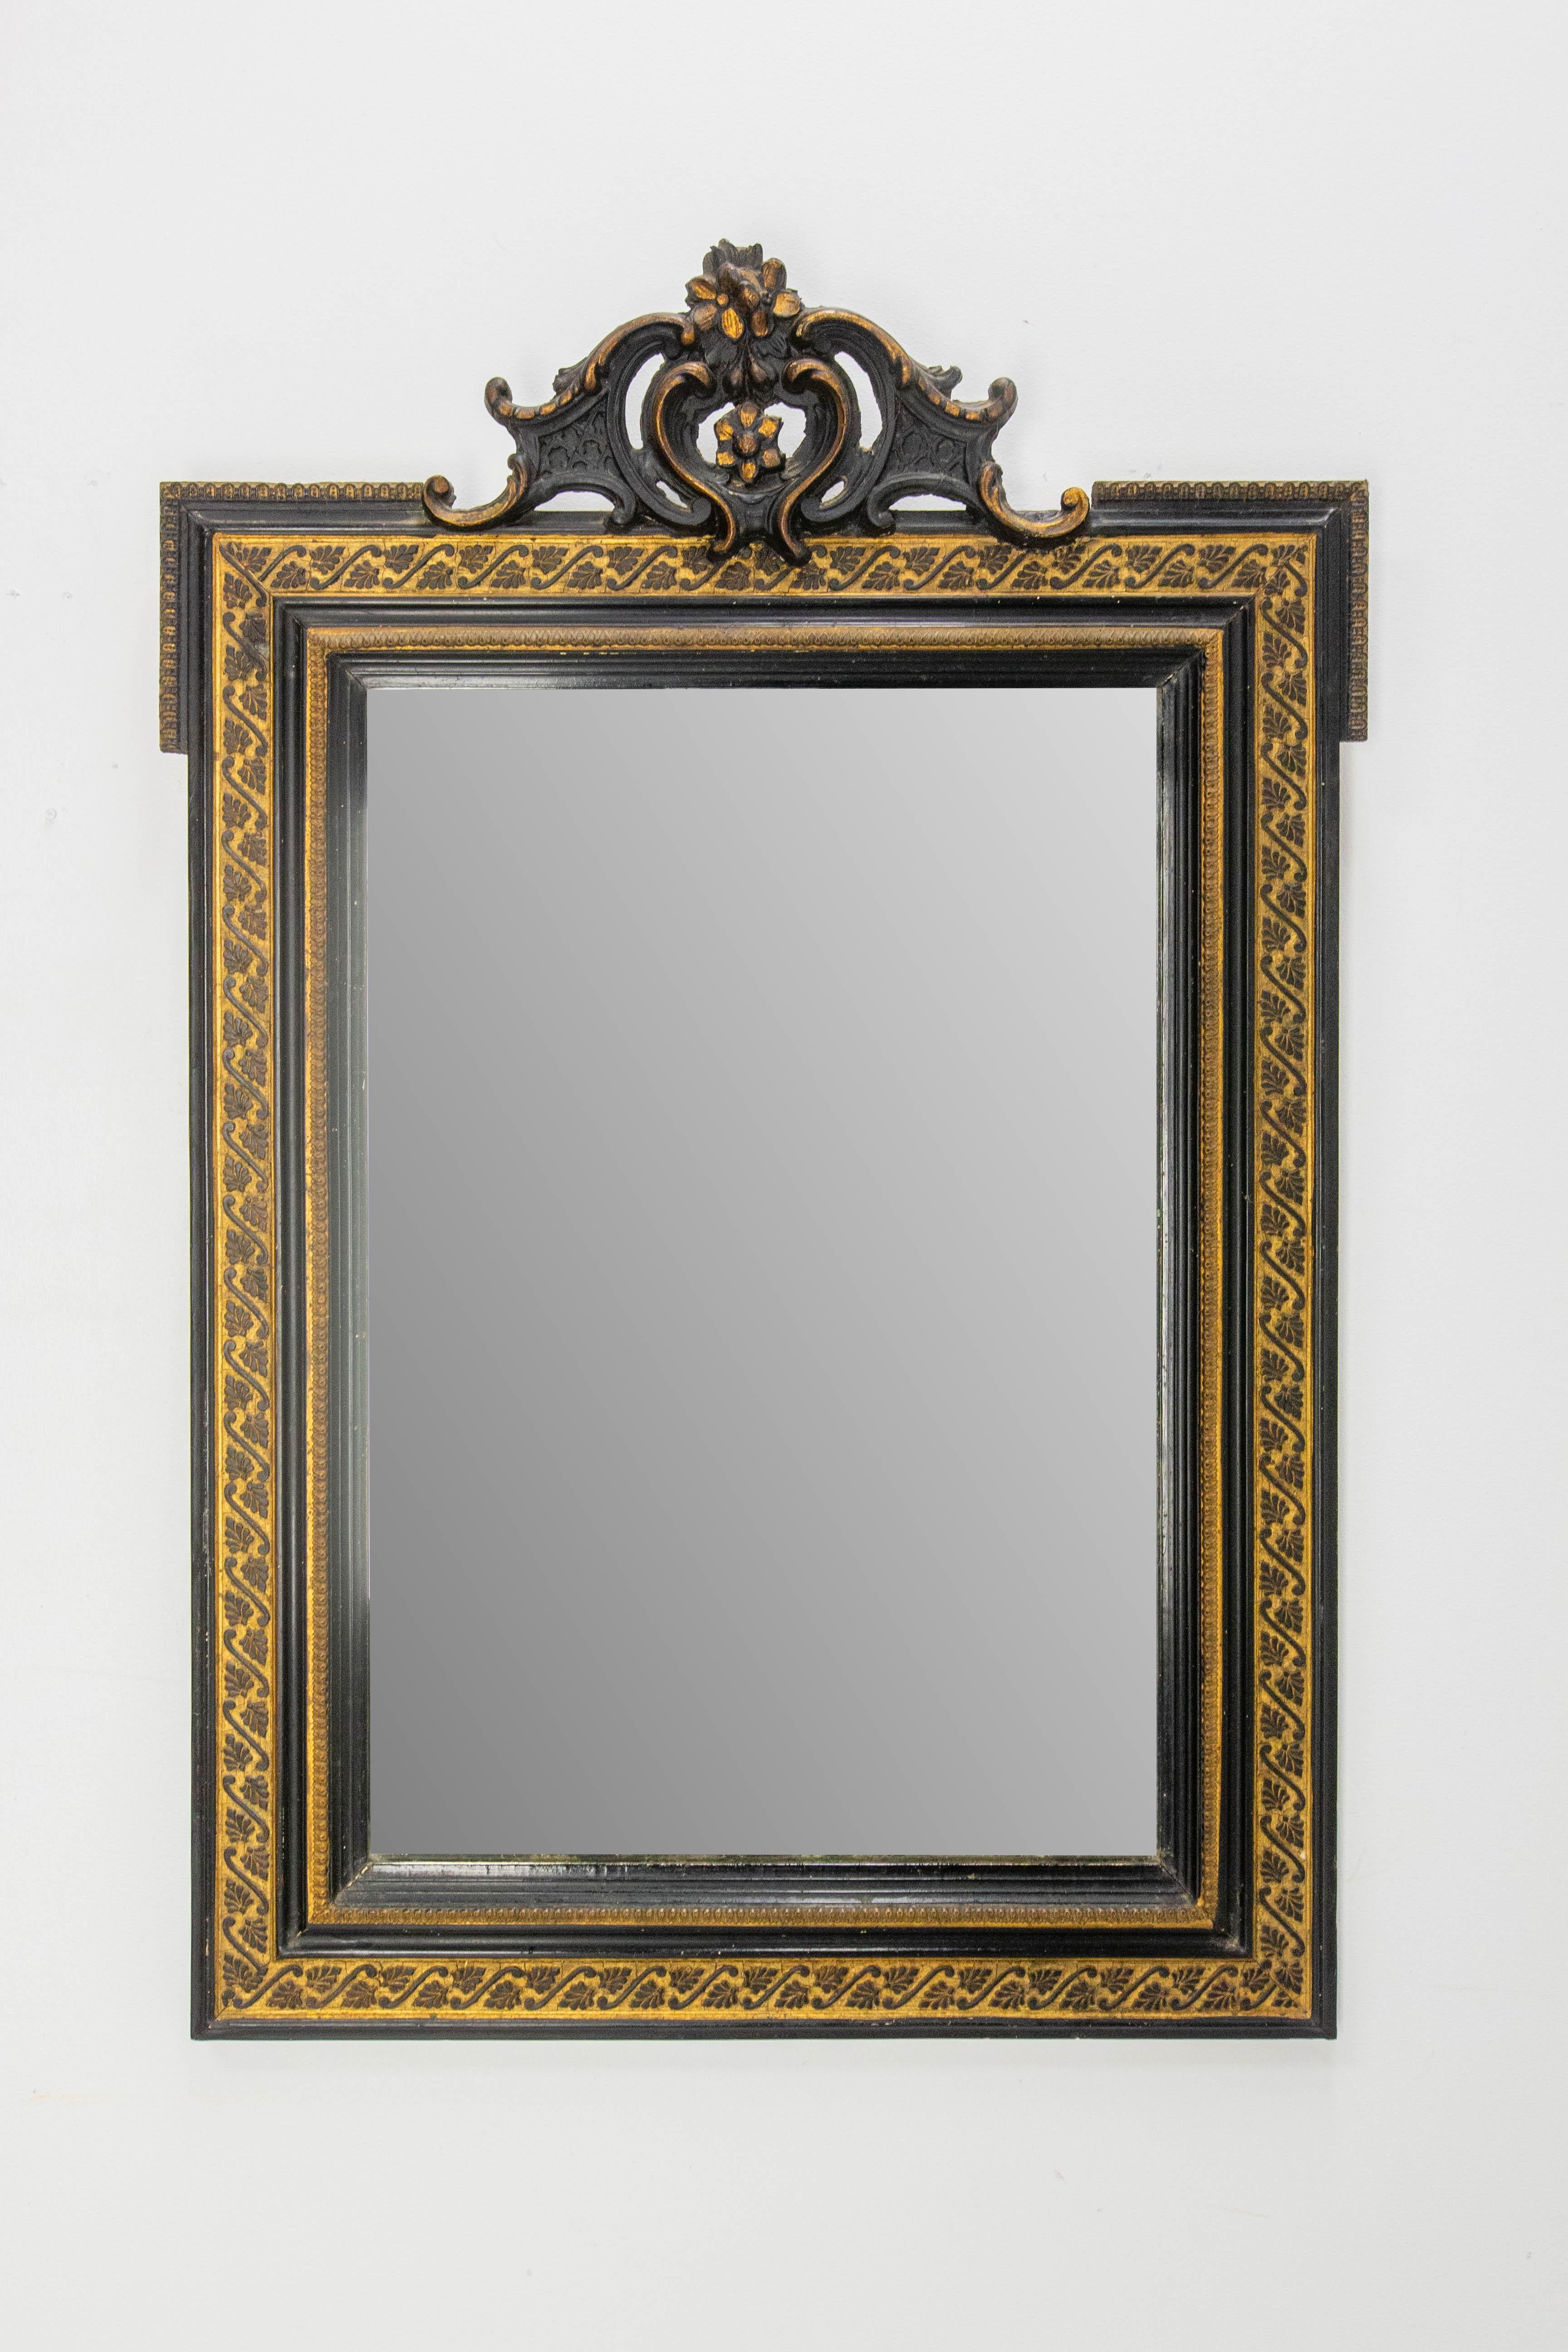 Napoléon III wood and stucco wall mirror painted of black and gold.
The black ans gold furniture are typical of the Napoleon III period.
The mirror is the original, with marks of time whch make a part of the interest of the mirror.
Good antique